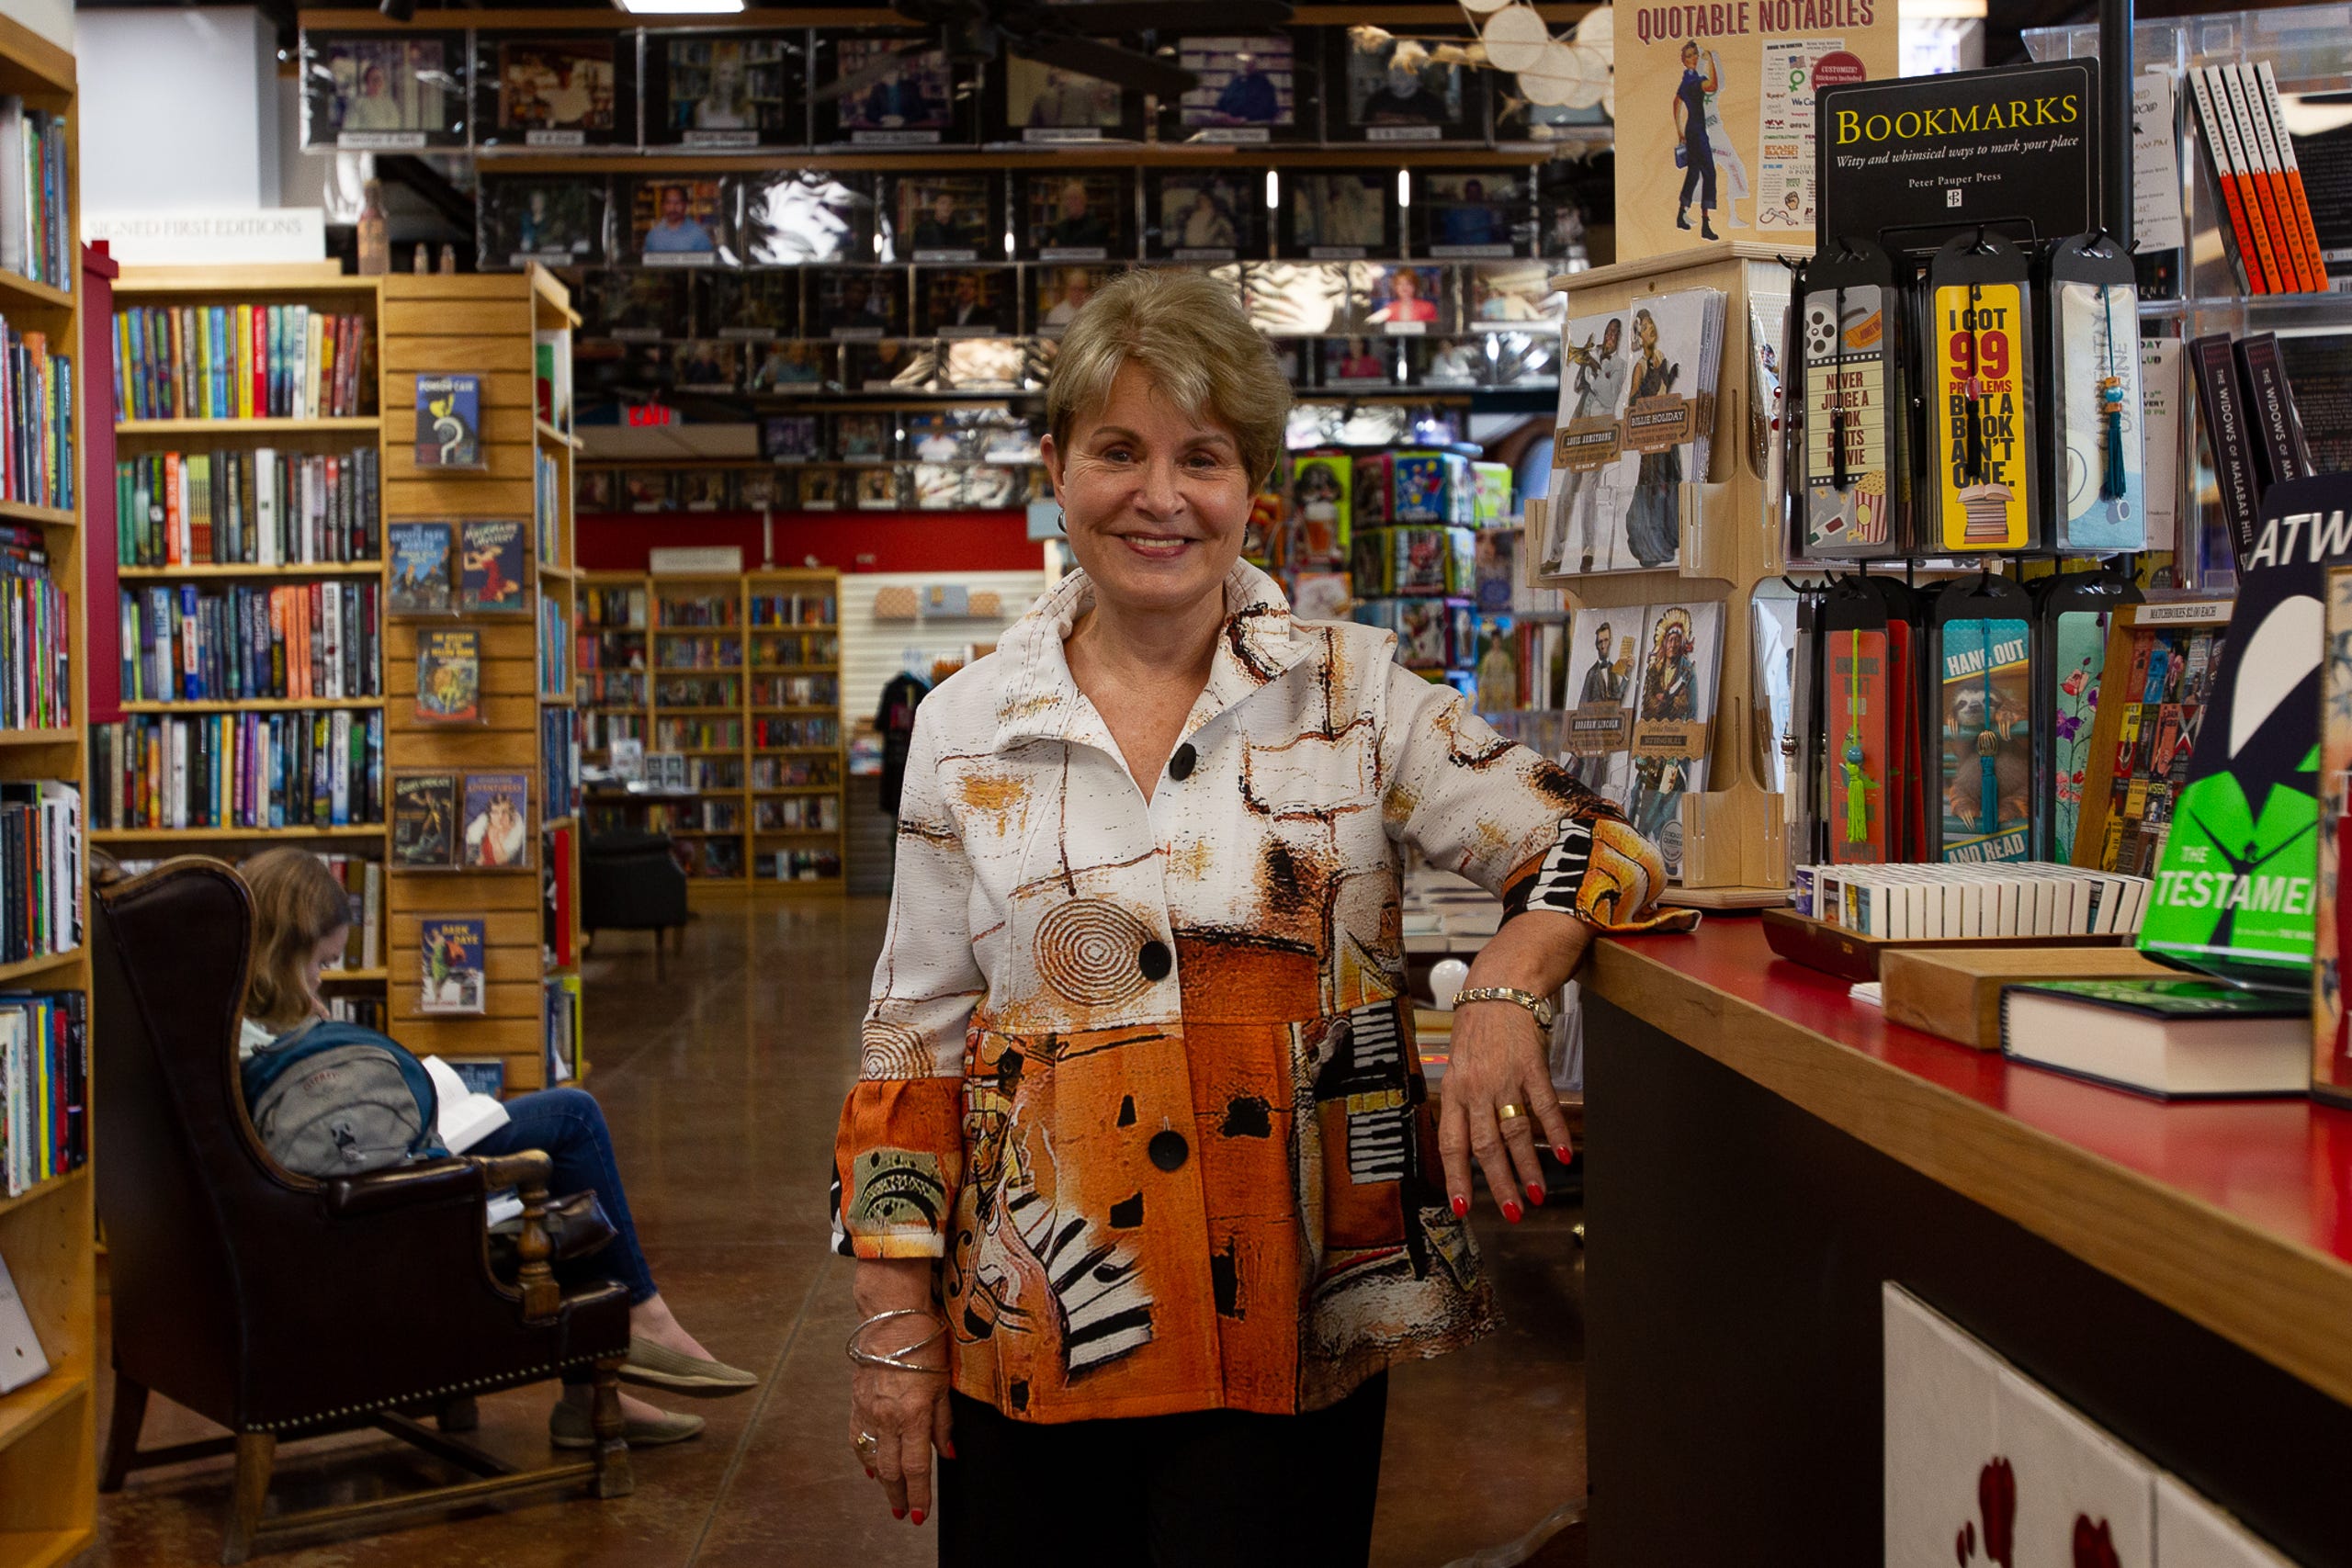 Barbara G. Peters opened Poisoned Pen Bookstore thirty years ago, September 24, 2019.